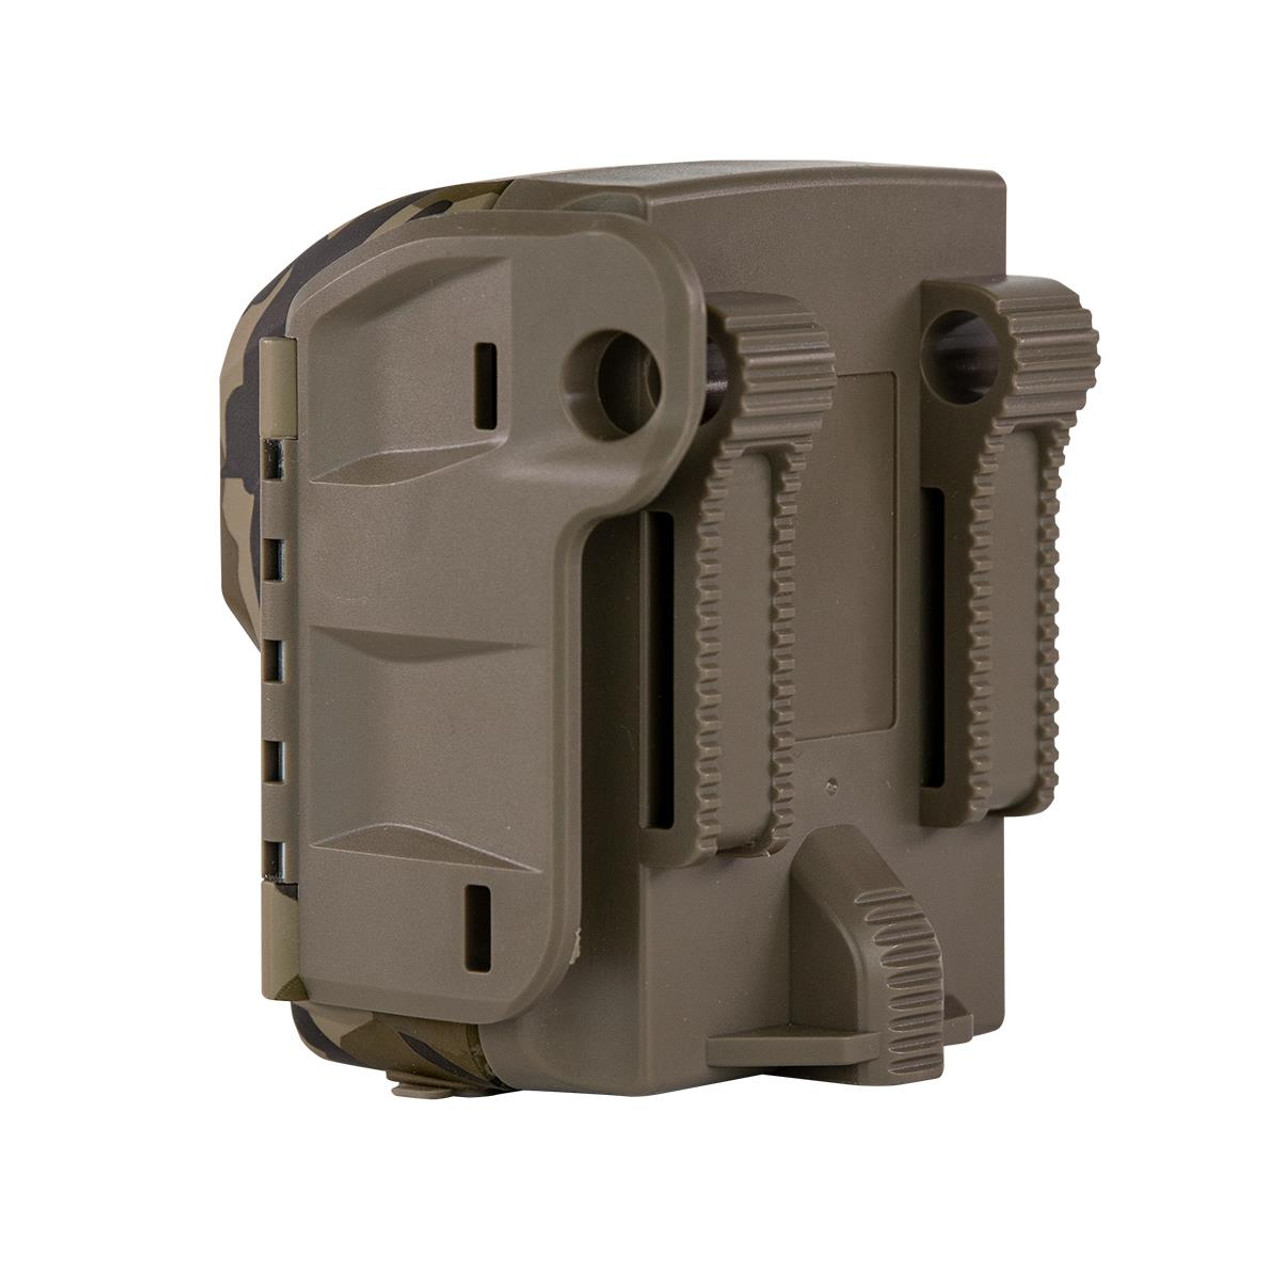 Moultrie Micro 42i Kit Trail Camera